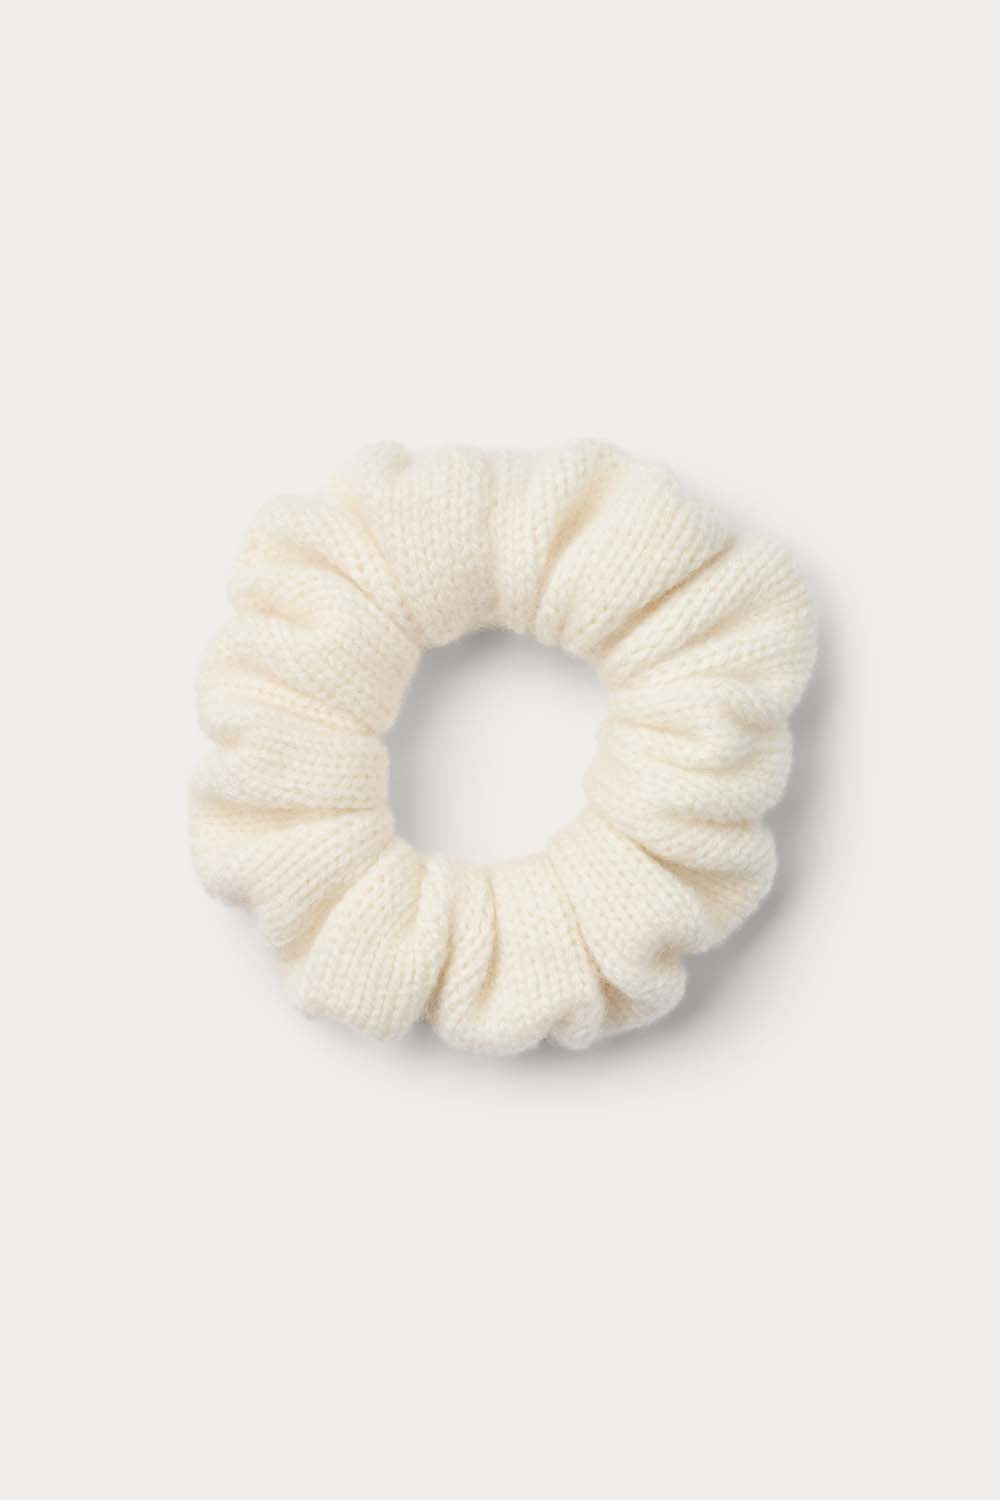 O'TAY Small Scrunchie Hair accessories Off White